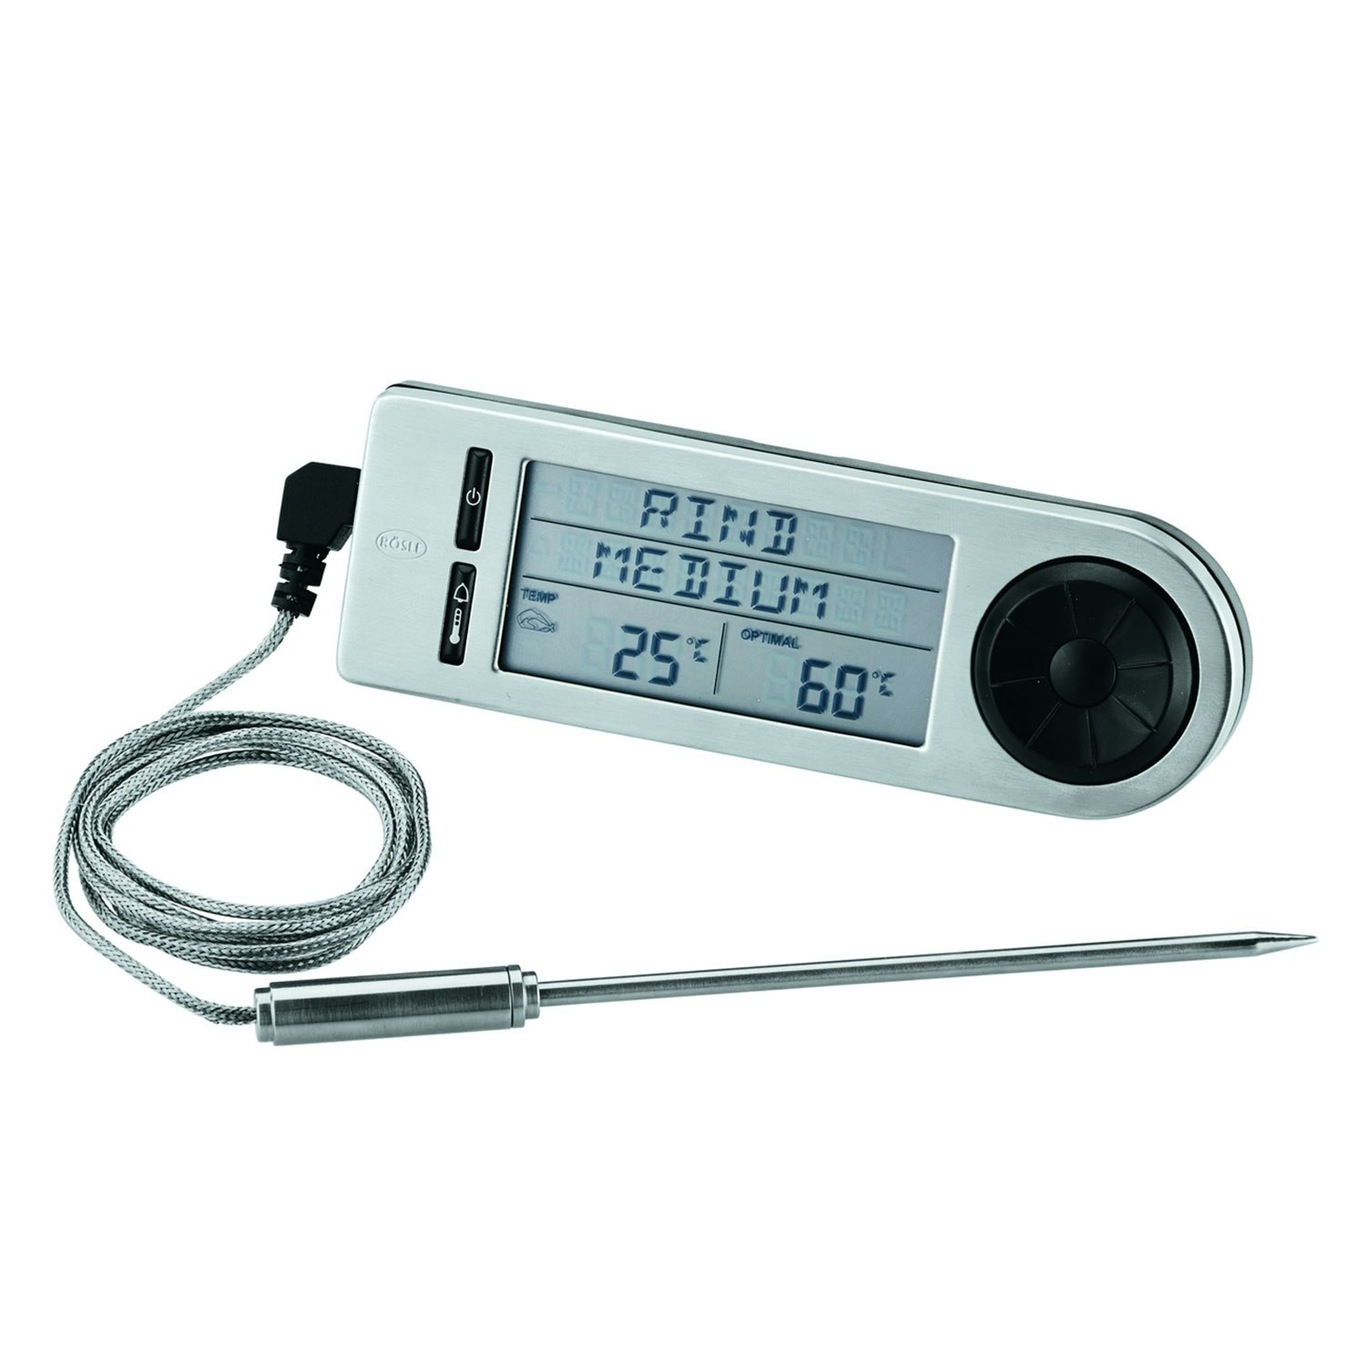 https://royaldesign.com/image/2/rosle-rosle-oven-thermometer-stainless-steel-0?w=800&quality=80